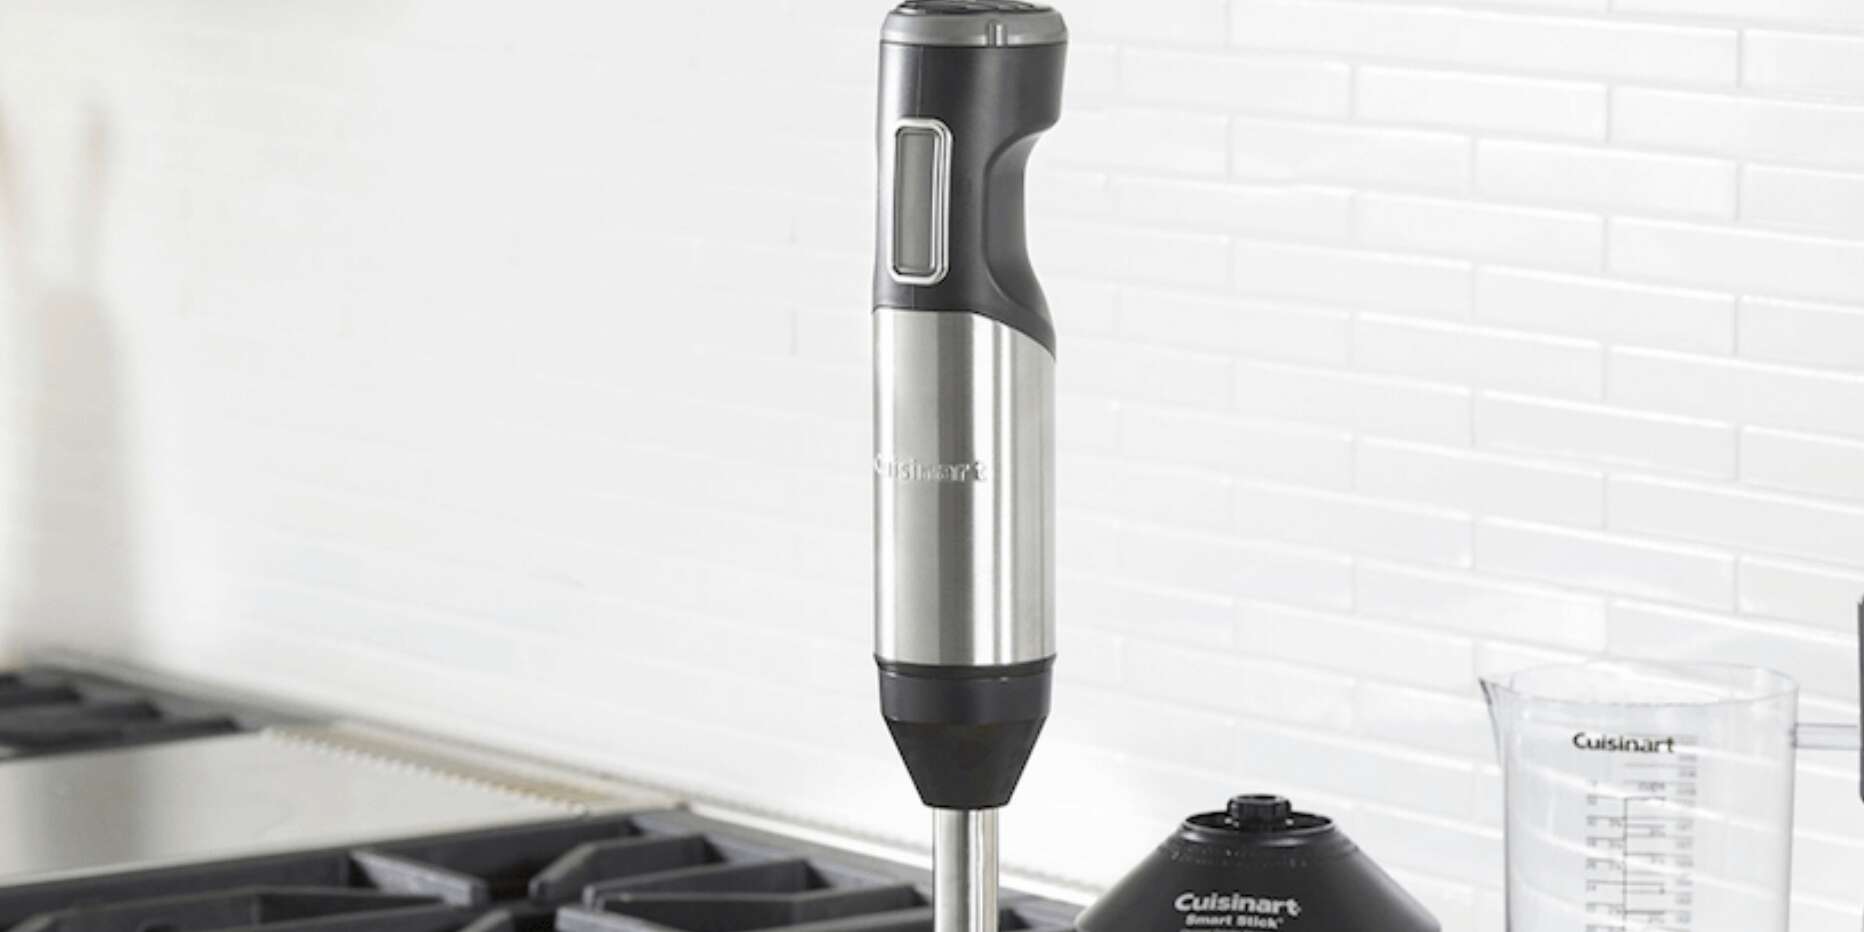 WHEN TO USE A HAND BLENDER?